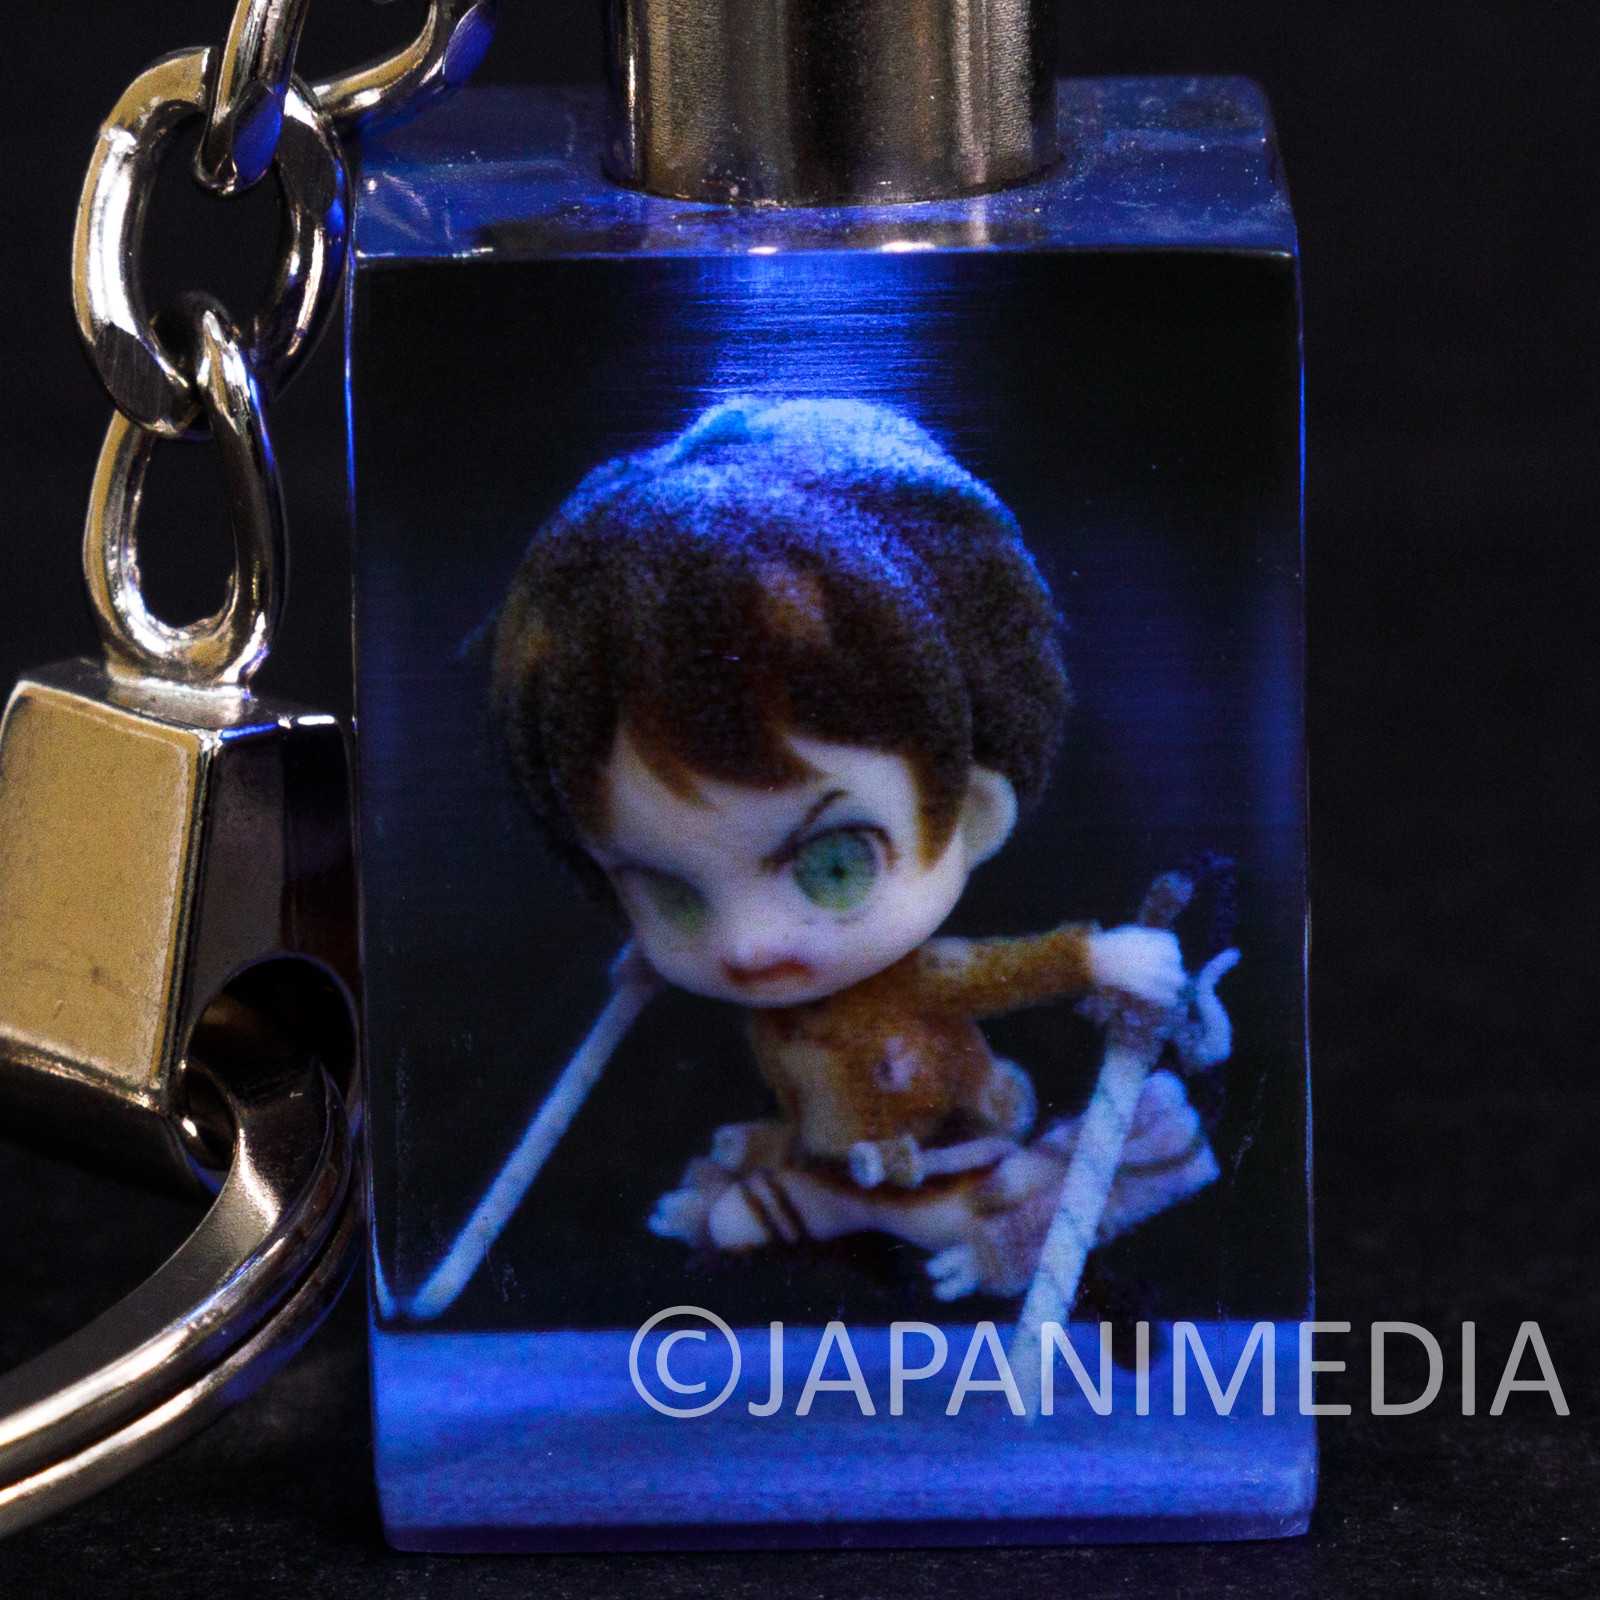 Attack on Titan Eren Yeager Mini Figure in Light up Cube Keychain JAPAN